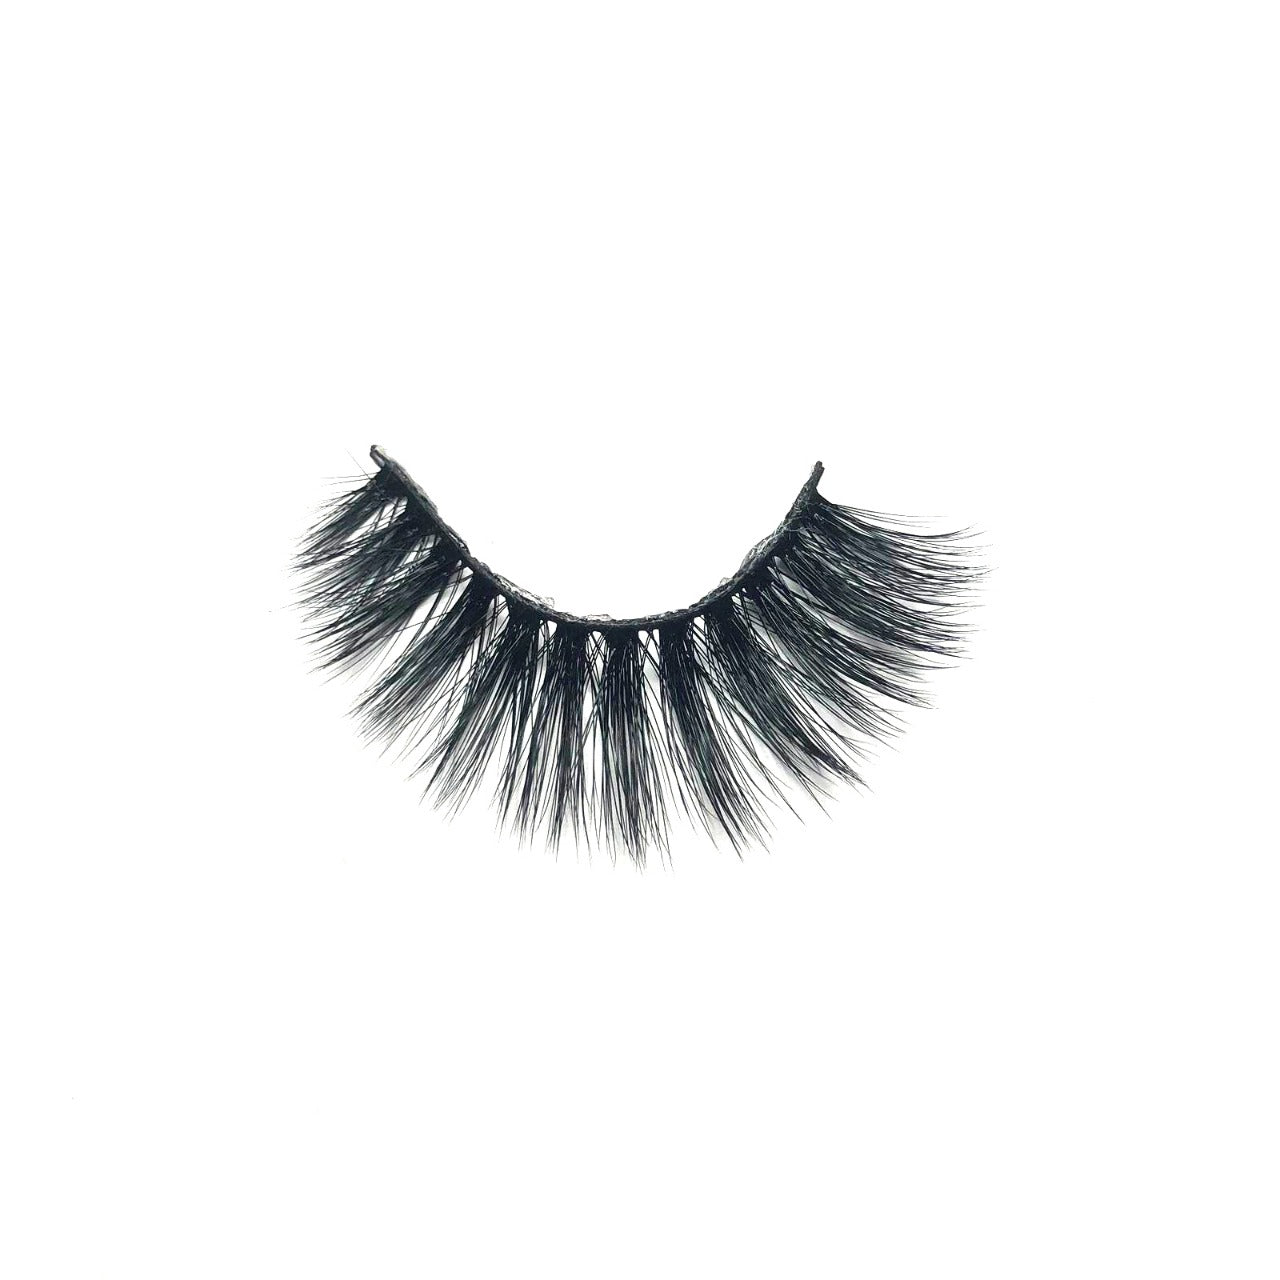 Press-on lashes